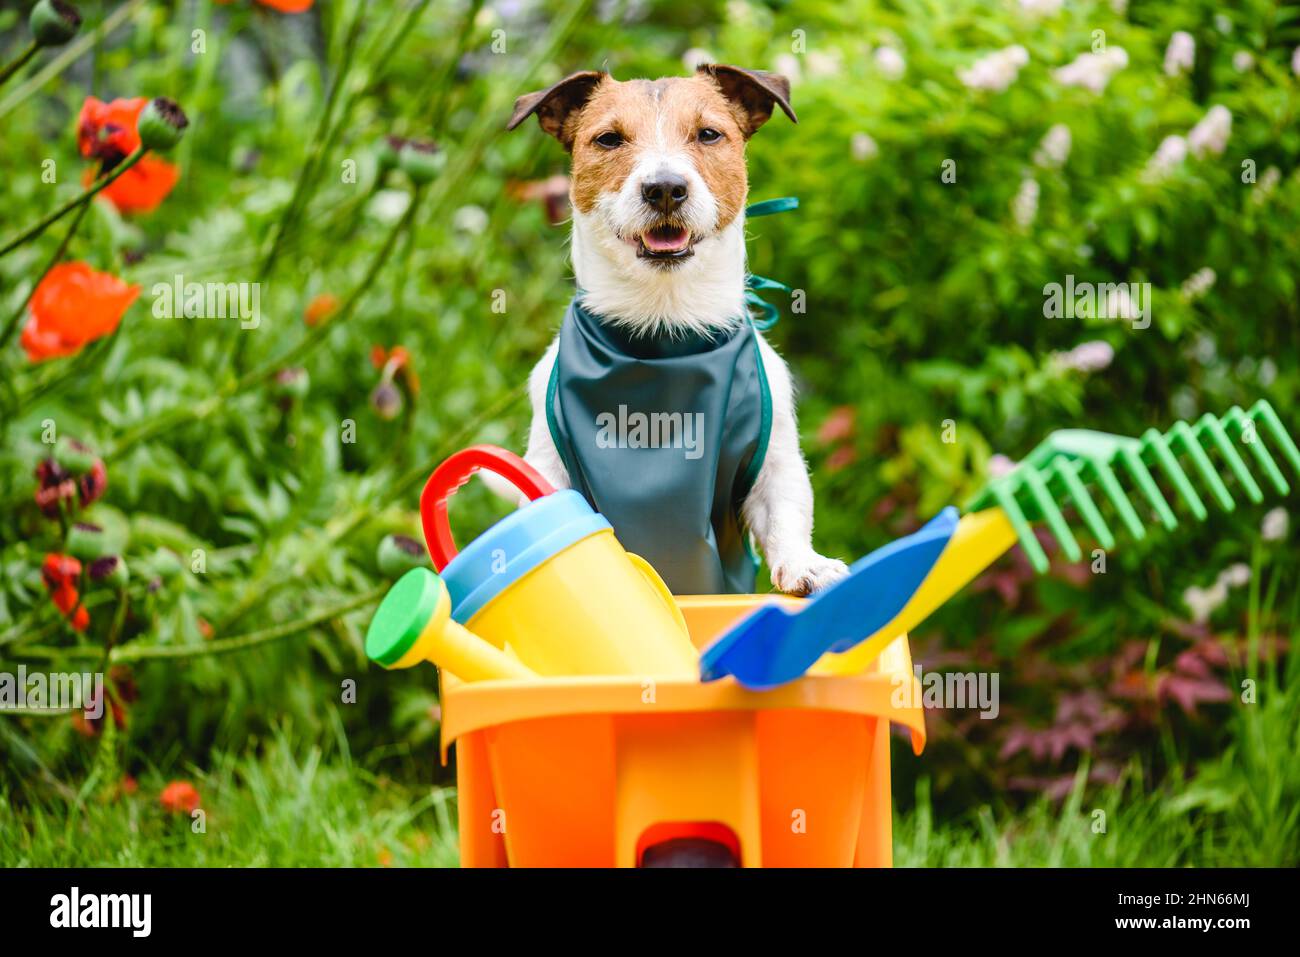 Funny gardener ready for landscaping and lawn care and maintenance work. Dog wearing green apron and leaning on wheelbarrow with garden tools Stock Photo